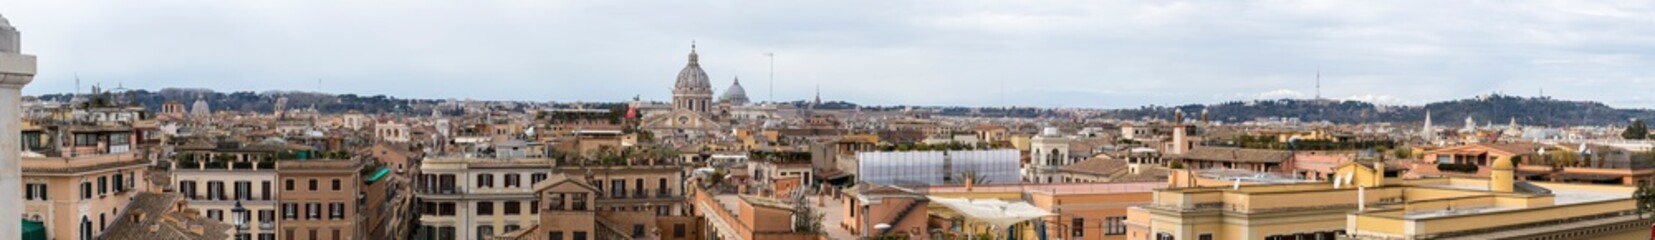 Fototapeta na wymiar Rome as the capital of Italy seen from above. Panorama view of Roman city with St. Peter's Basilica, colosseum and Roman forums.